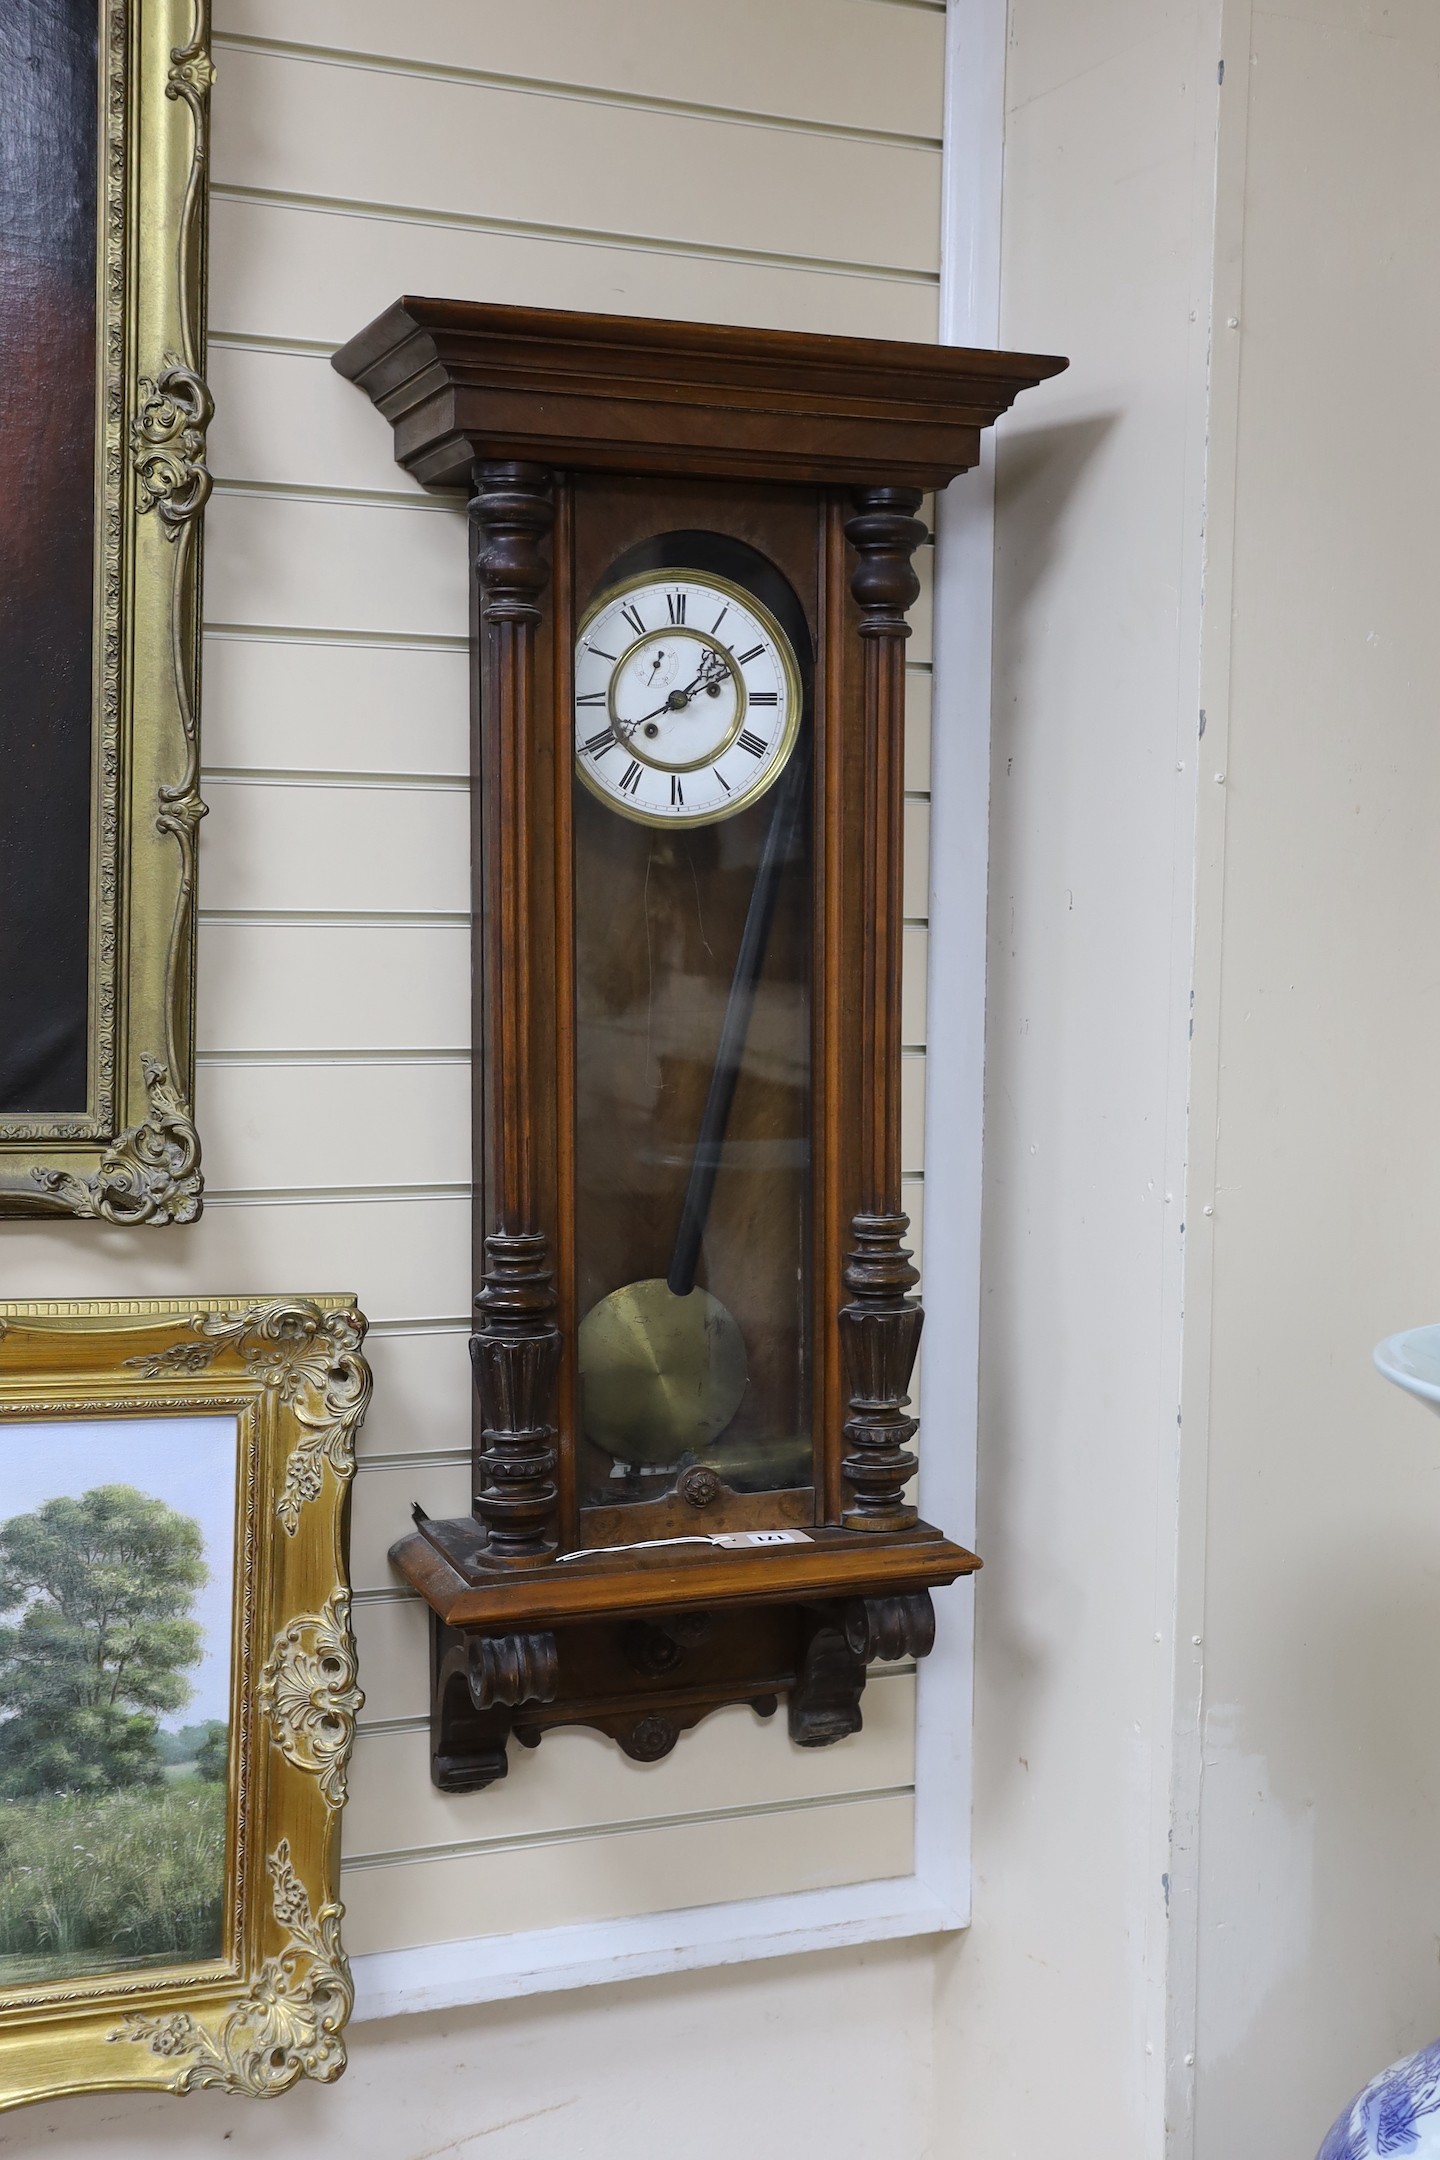 An early 20th century Vienna type wall clock